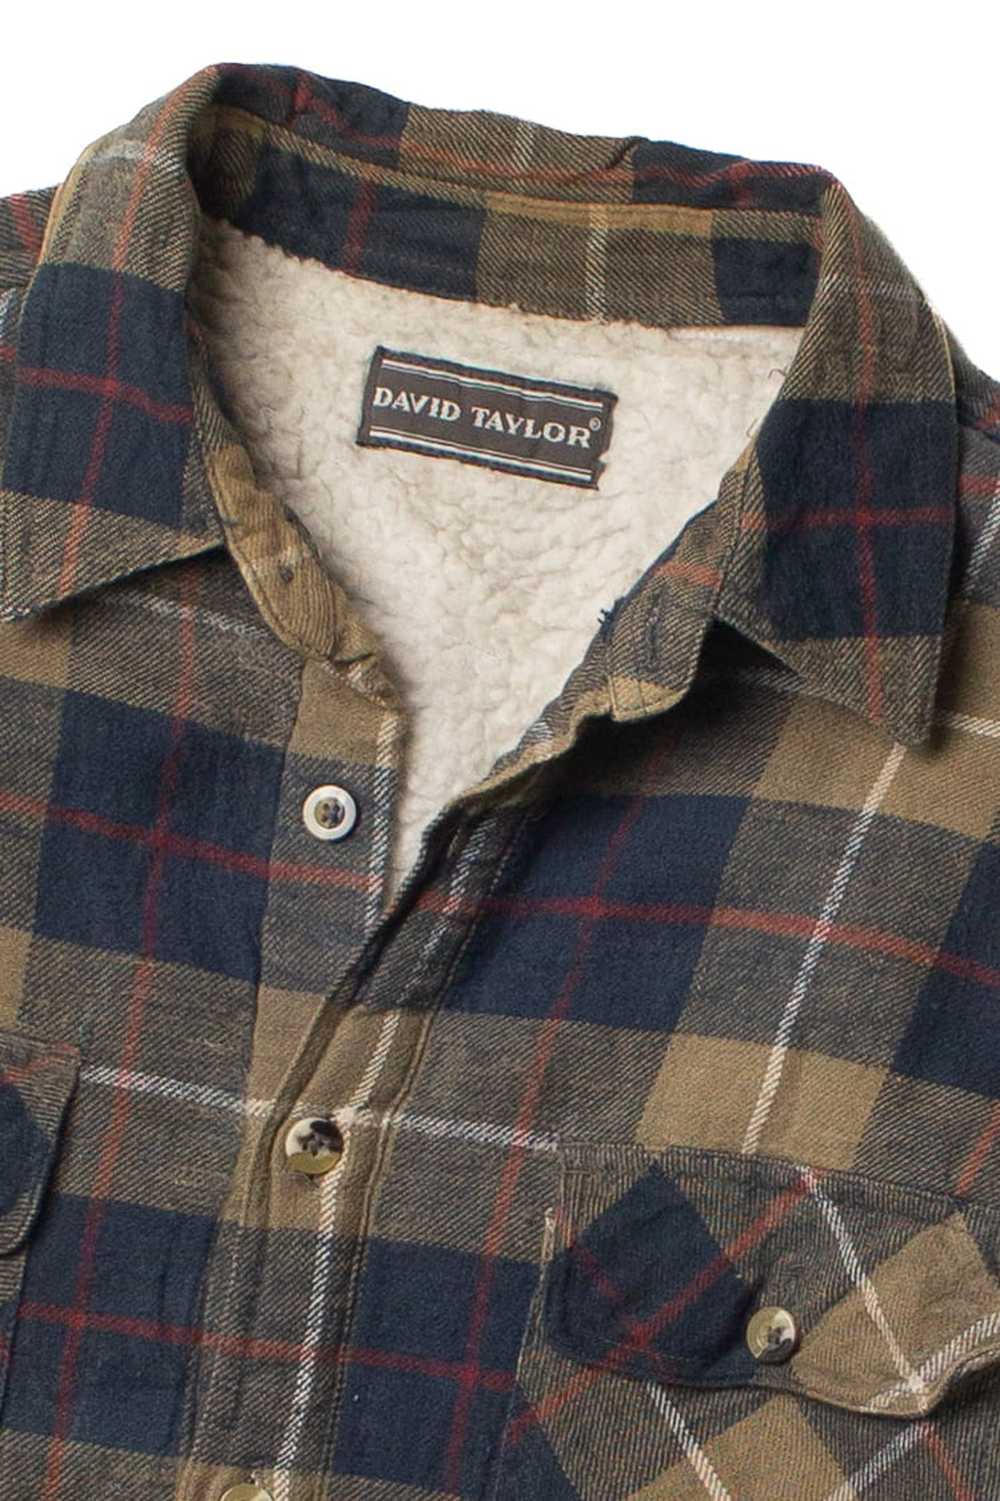 David Taylor Sherpa Lined Flannel Shirt - image 2